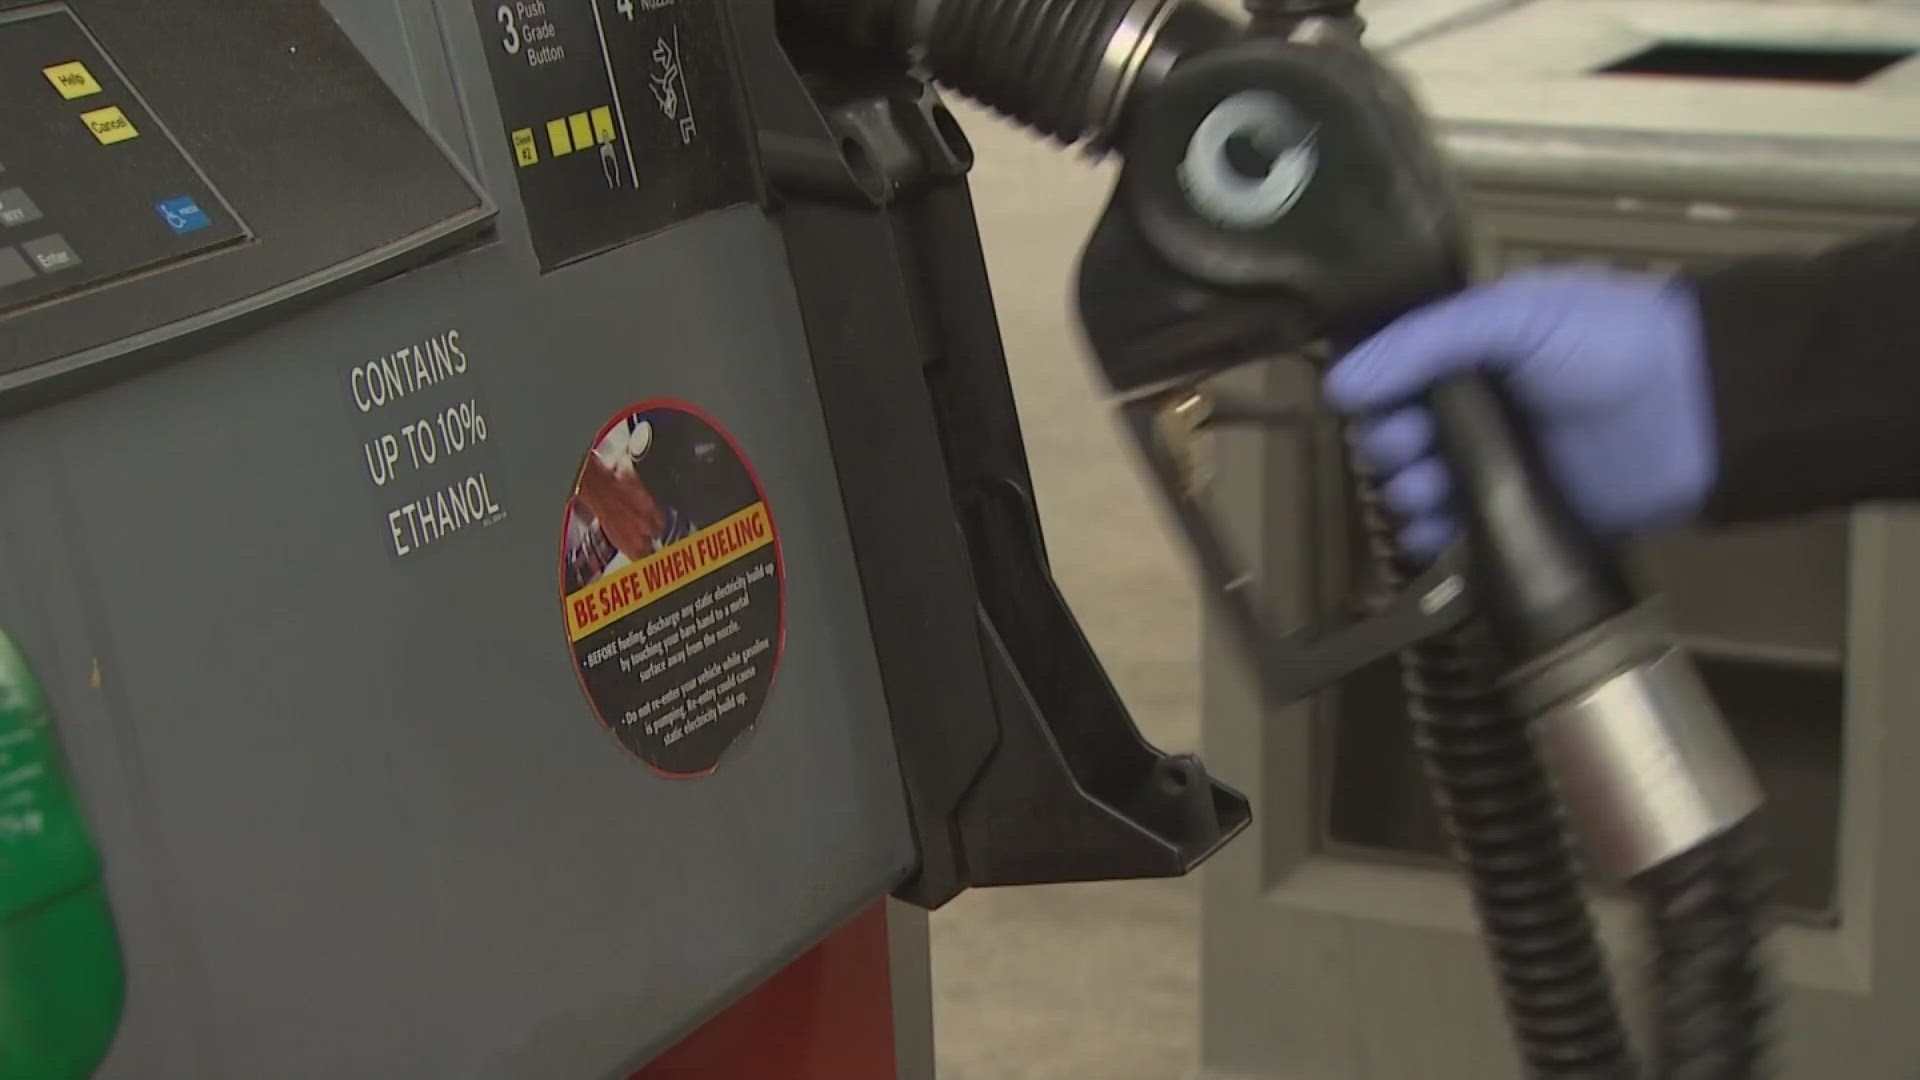 A gallon of gasoline costs $4.95 in Washington state, up from $4.61 one month ago.